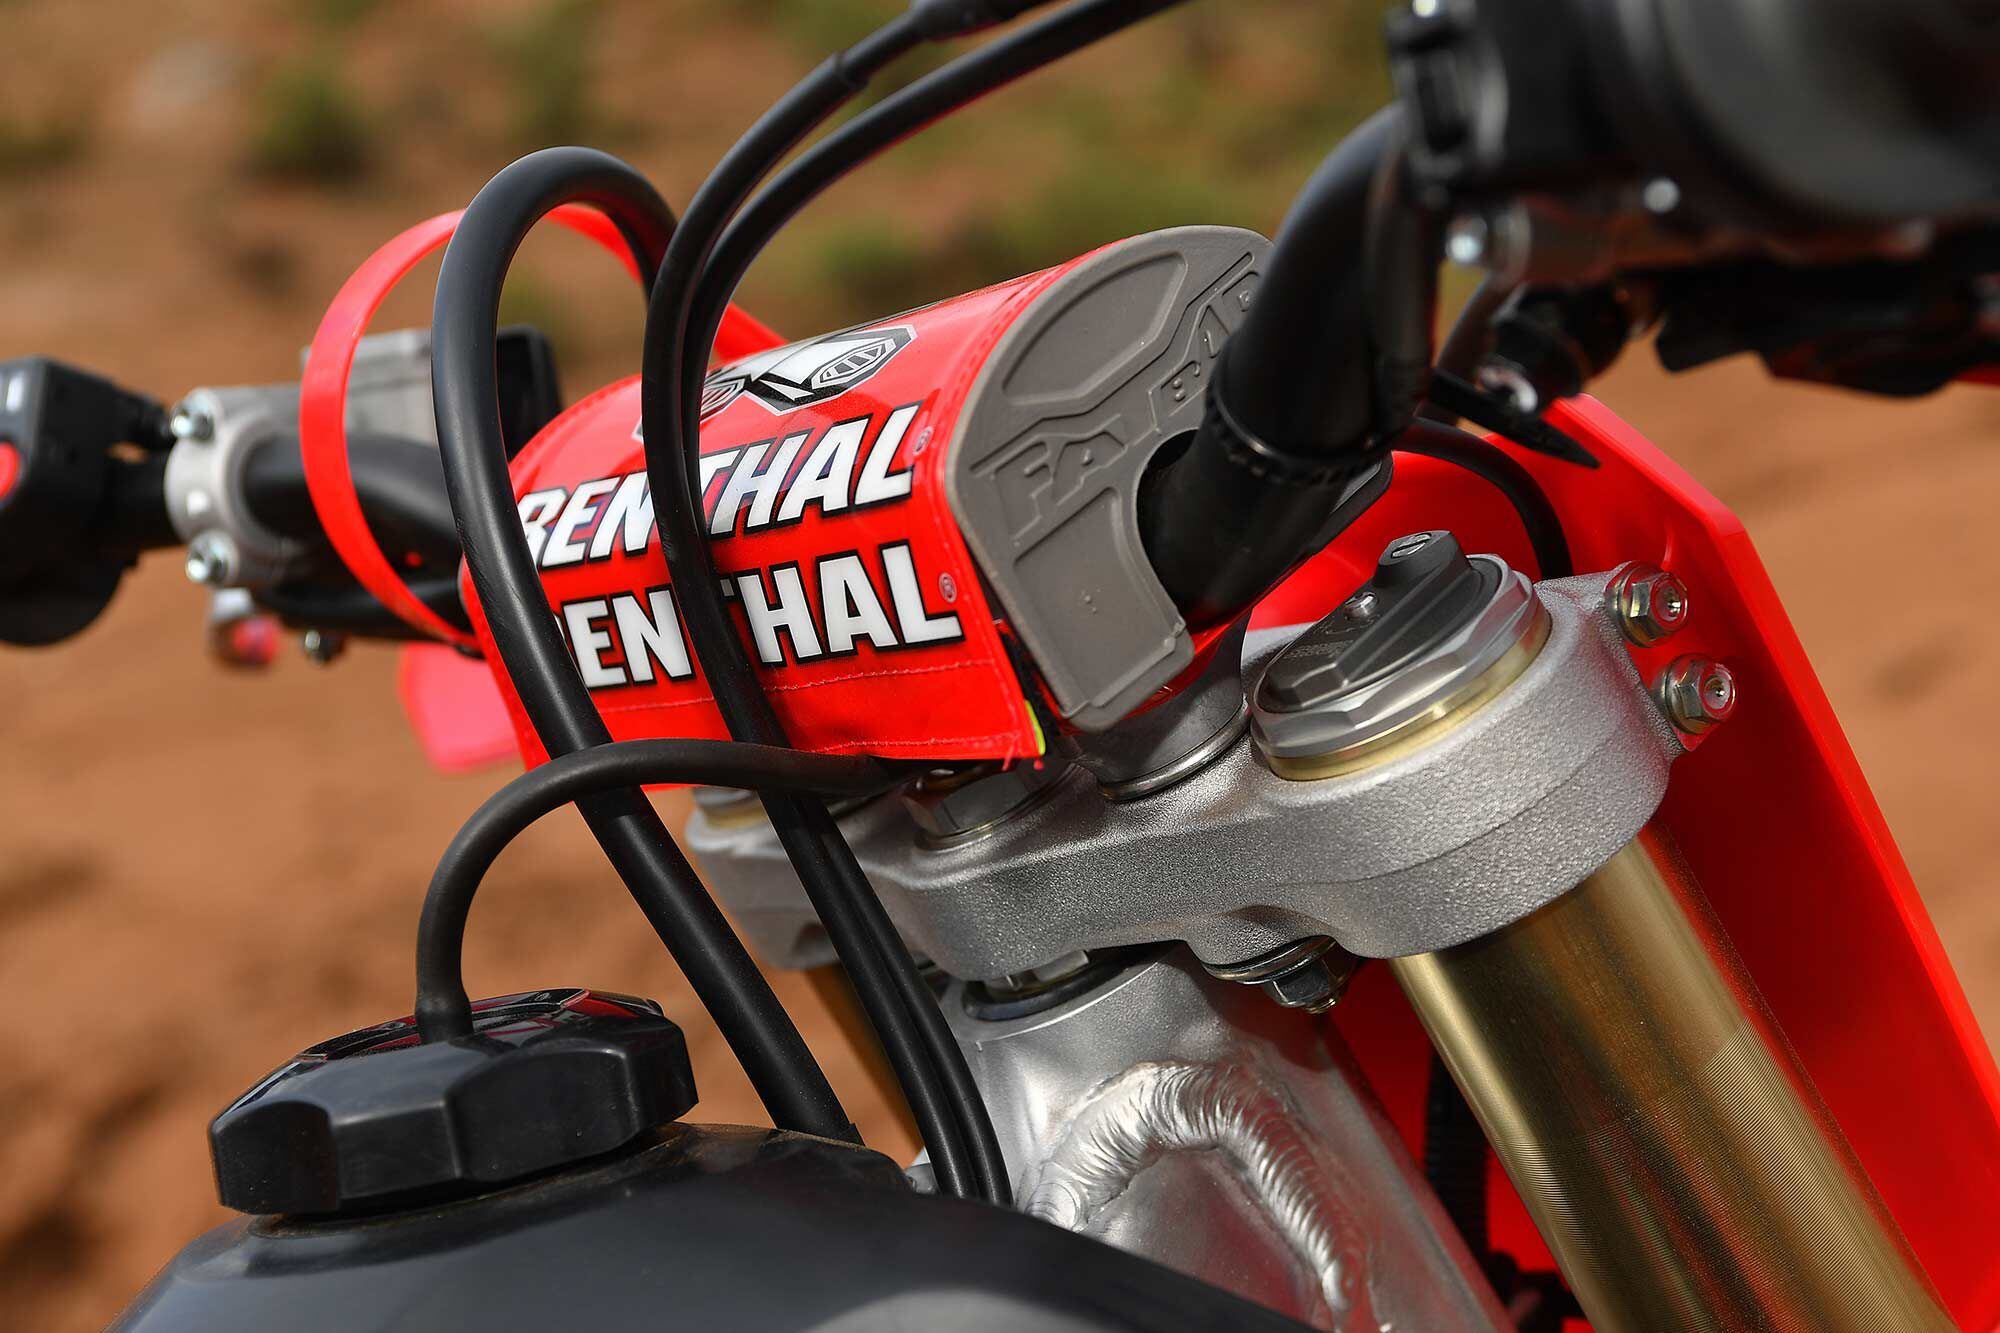 A Renthal Fatbar 839-bend handlebar graces the CRF450RX and multiple bar mount locations provide 26mm of cockpit adjustment to accommodate riders of all sizes. Interesting to note the standard fork height placement: Running the fork flush yields more stability, whereas closer to 5mm makes the RX even more nimble. This middle setting worked well for the tight and technical conditions we encountered at Honda’s off-road introduction.